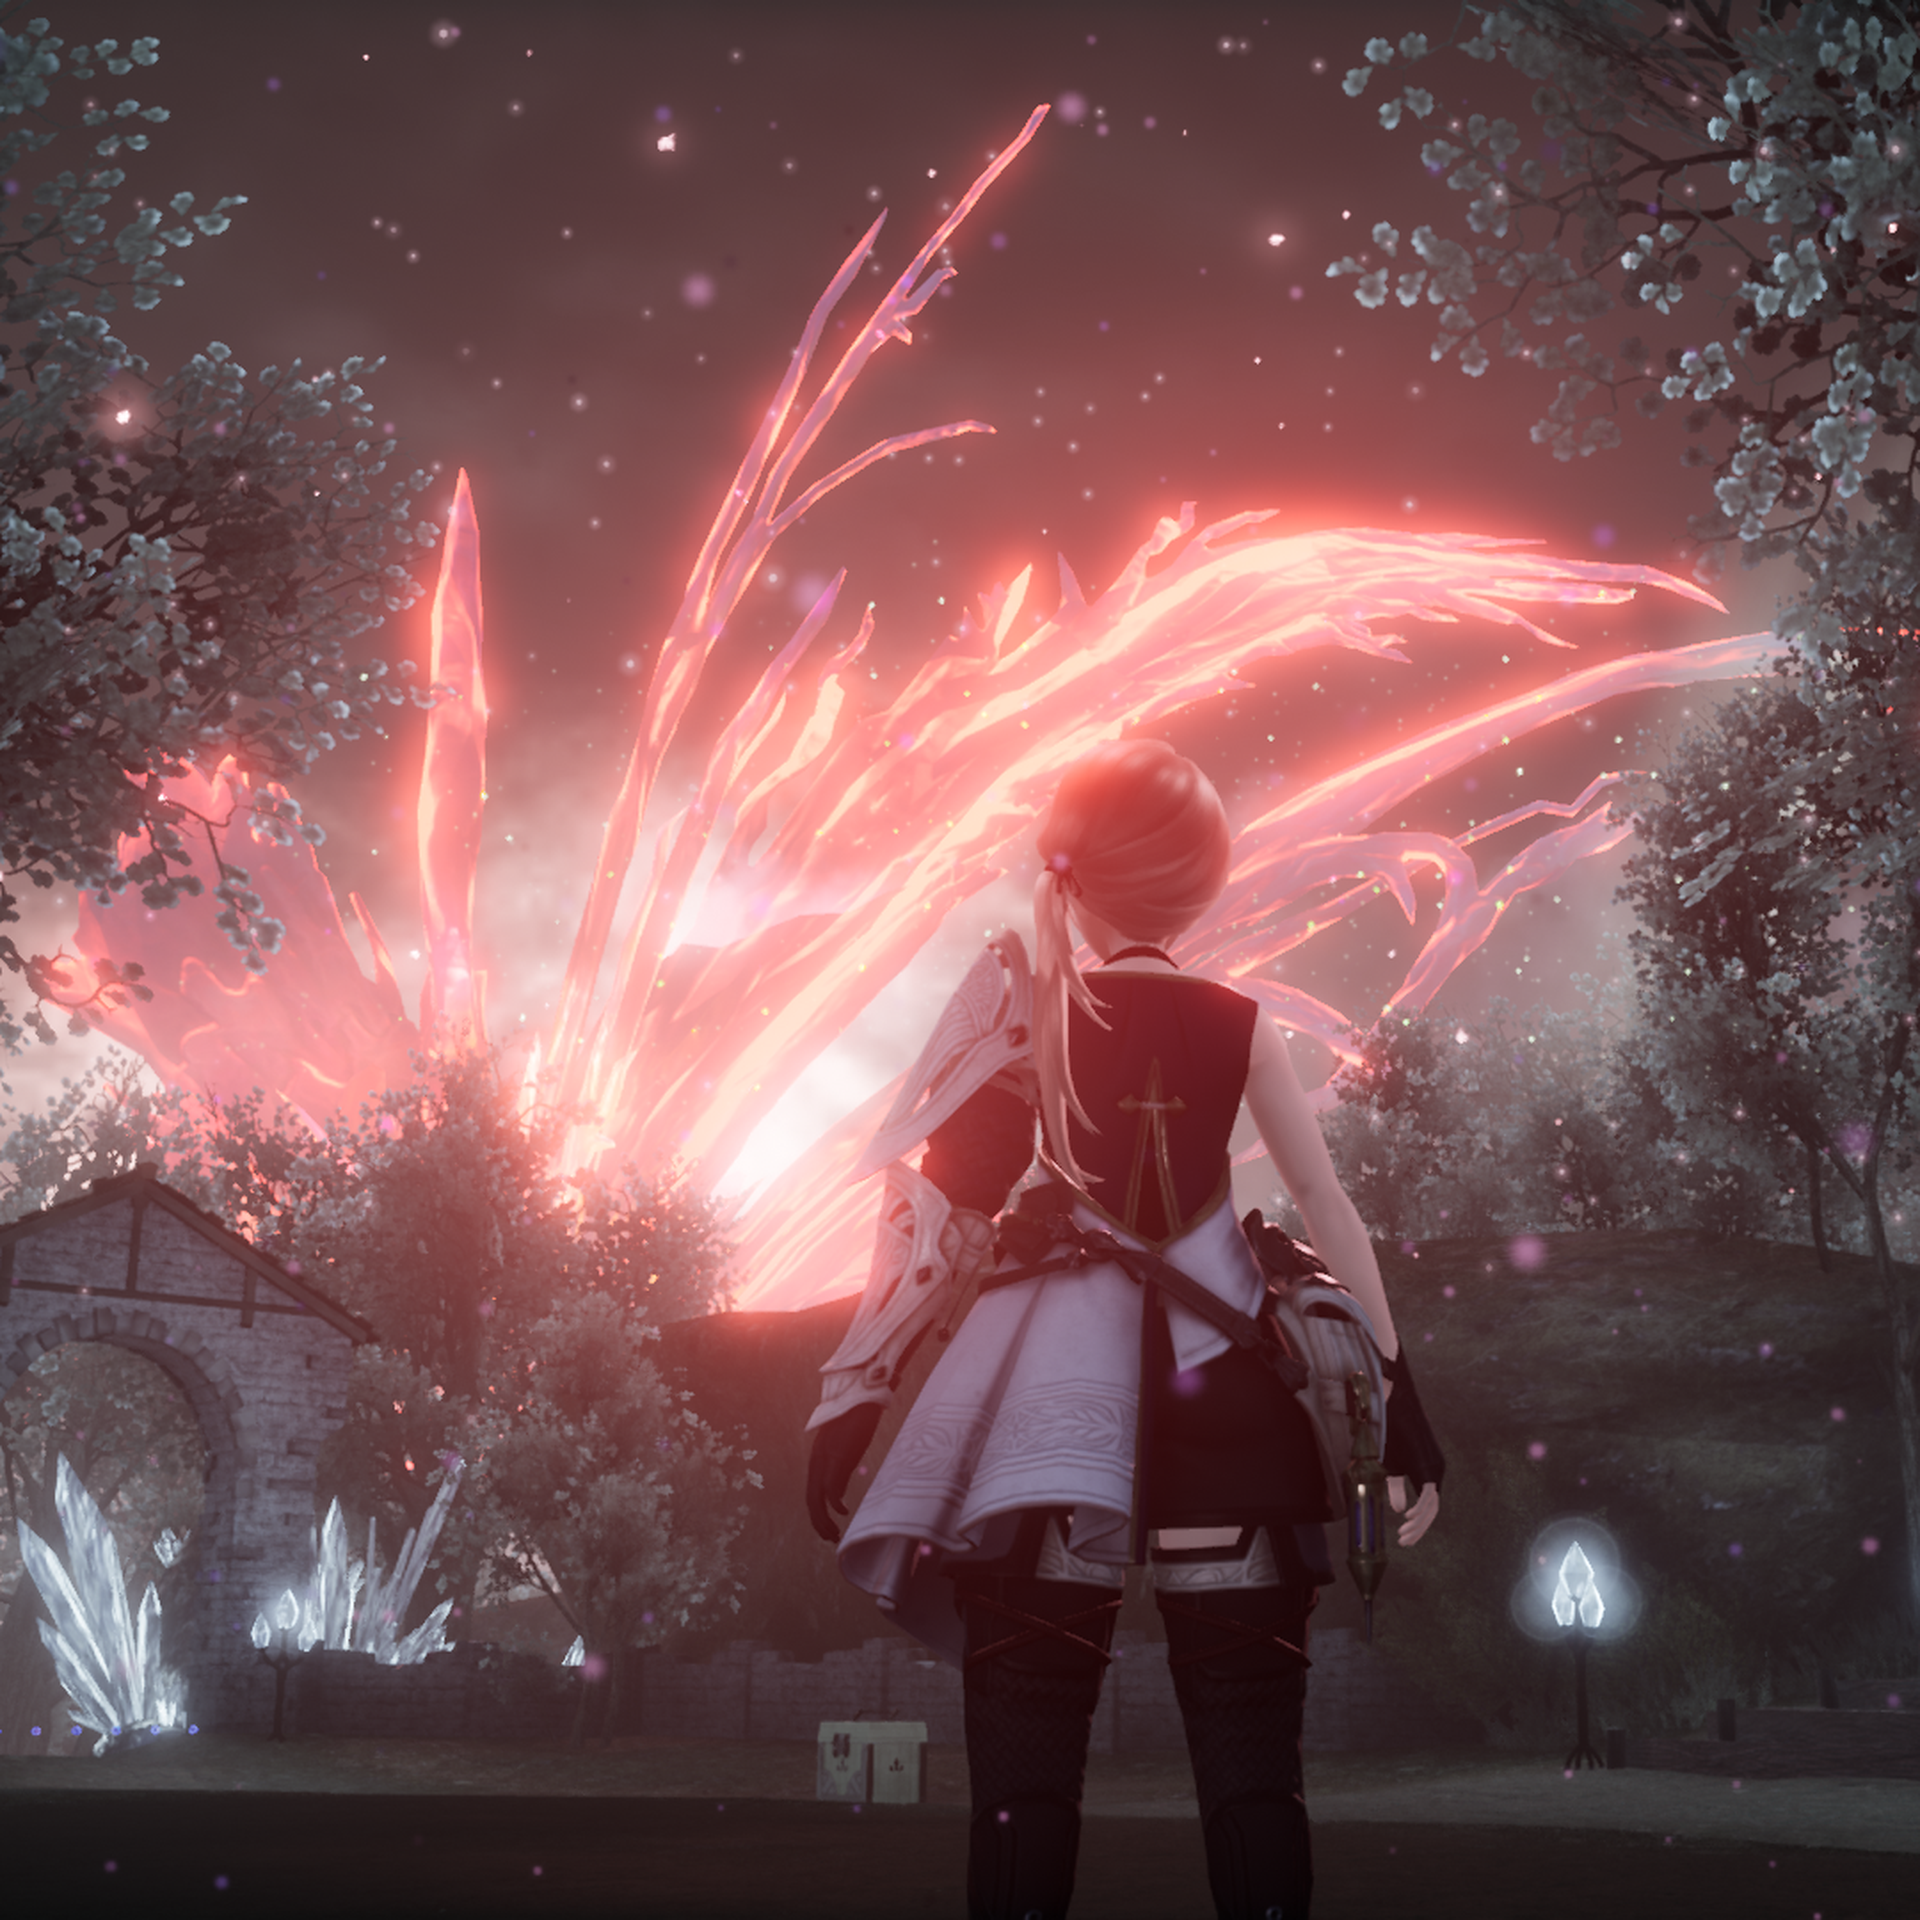 Video game screenshot of a person in a medieval-style village at night, while large magical red flames shoot into the sky